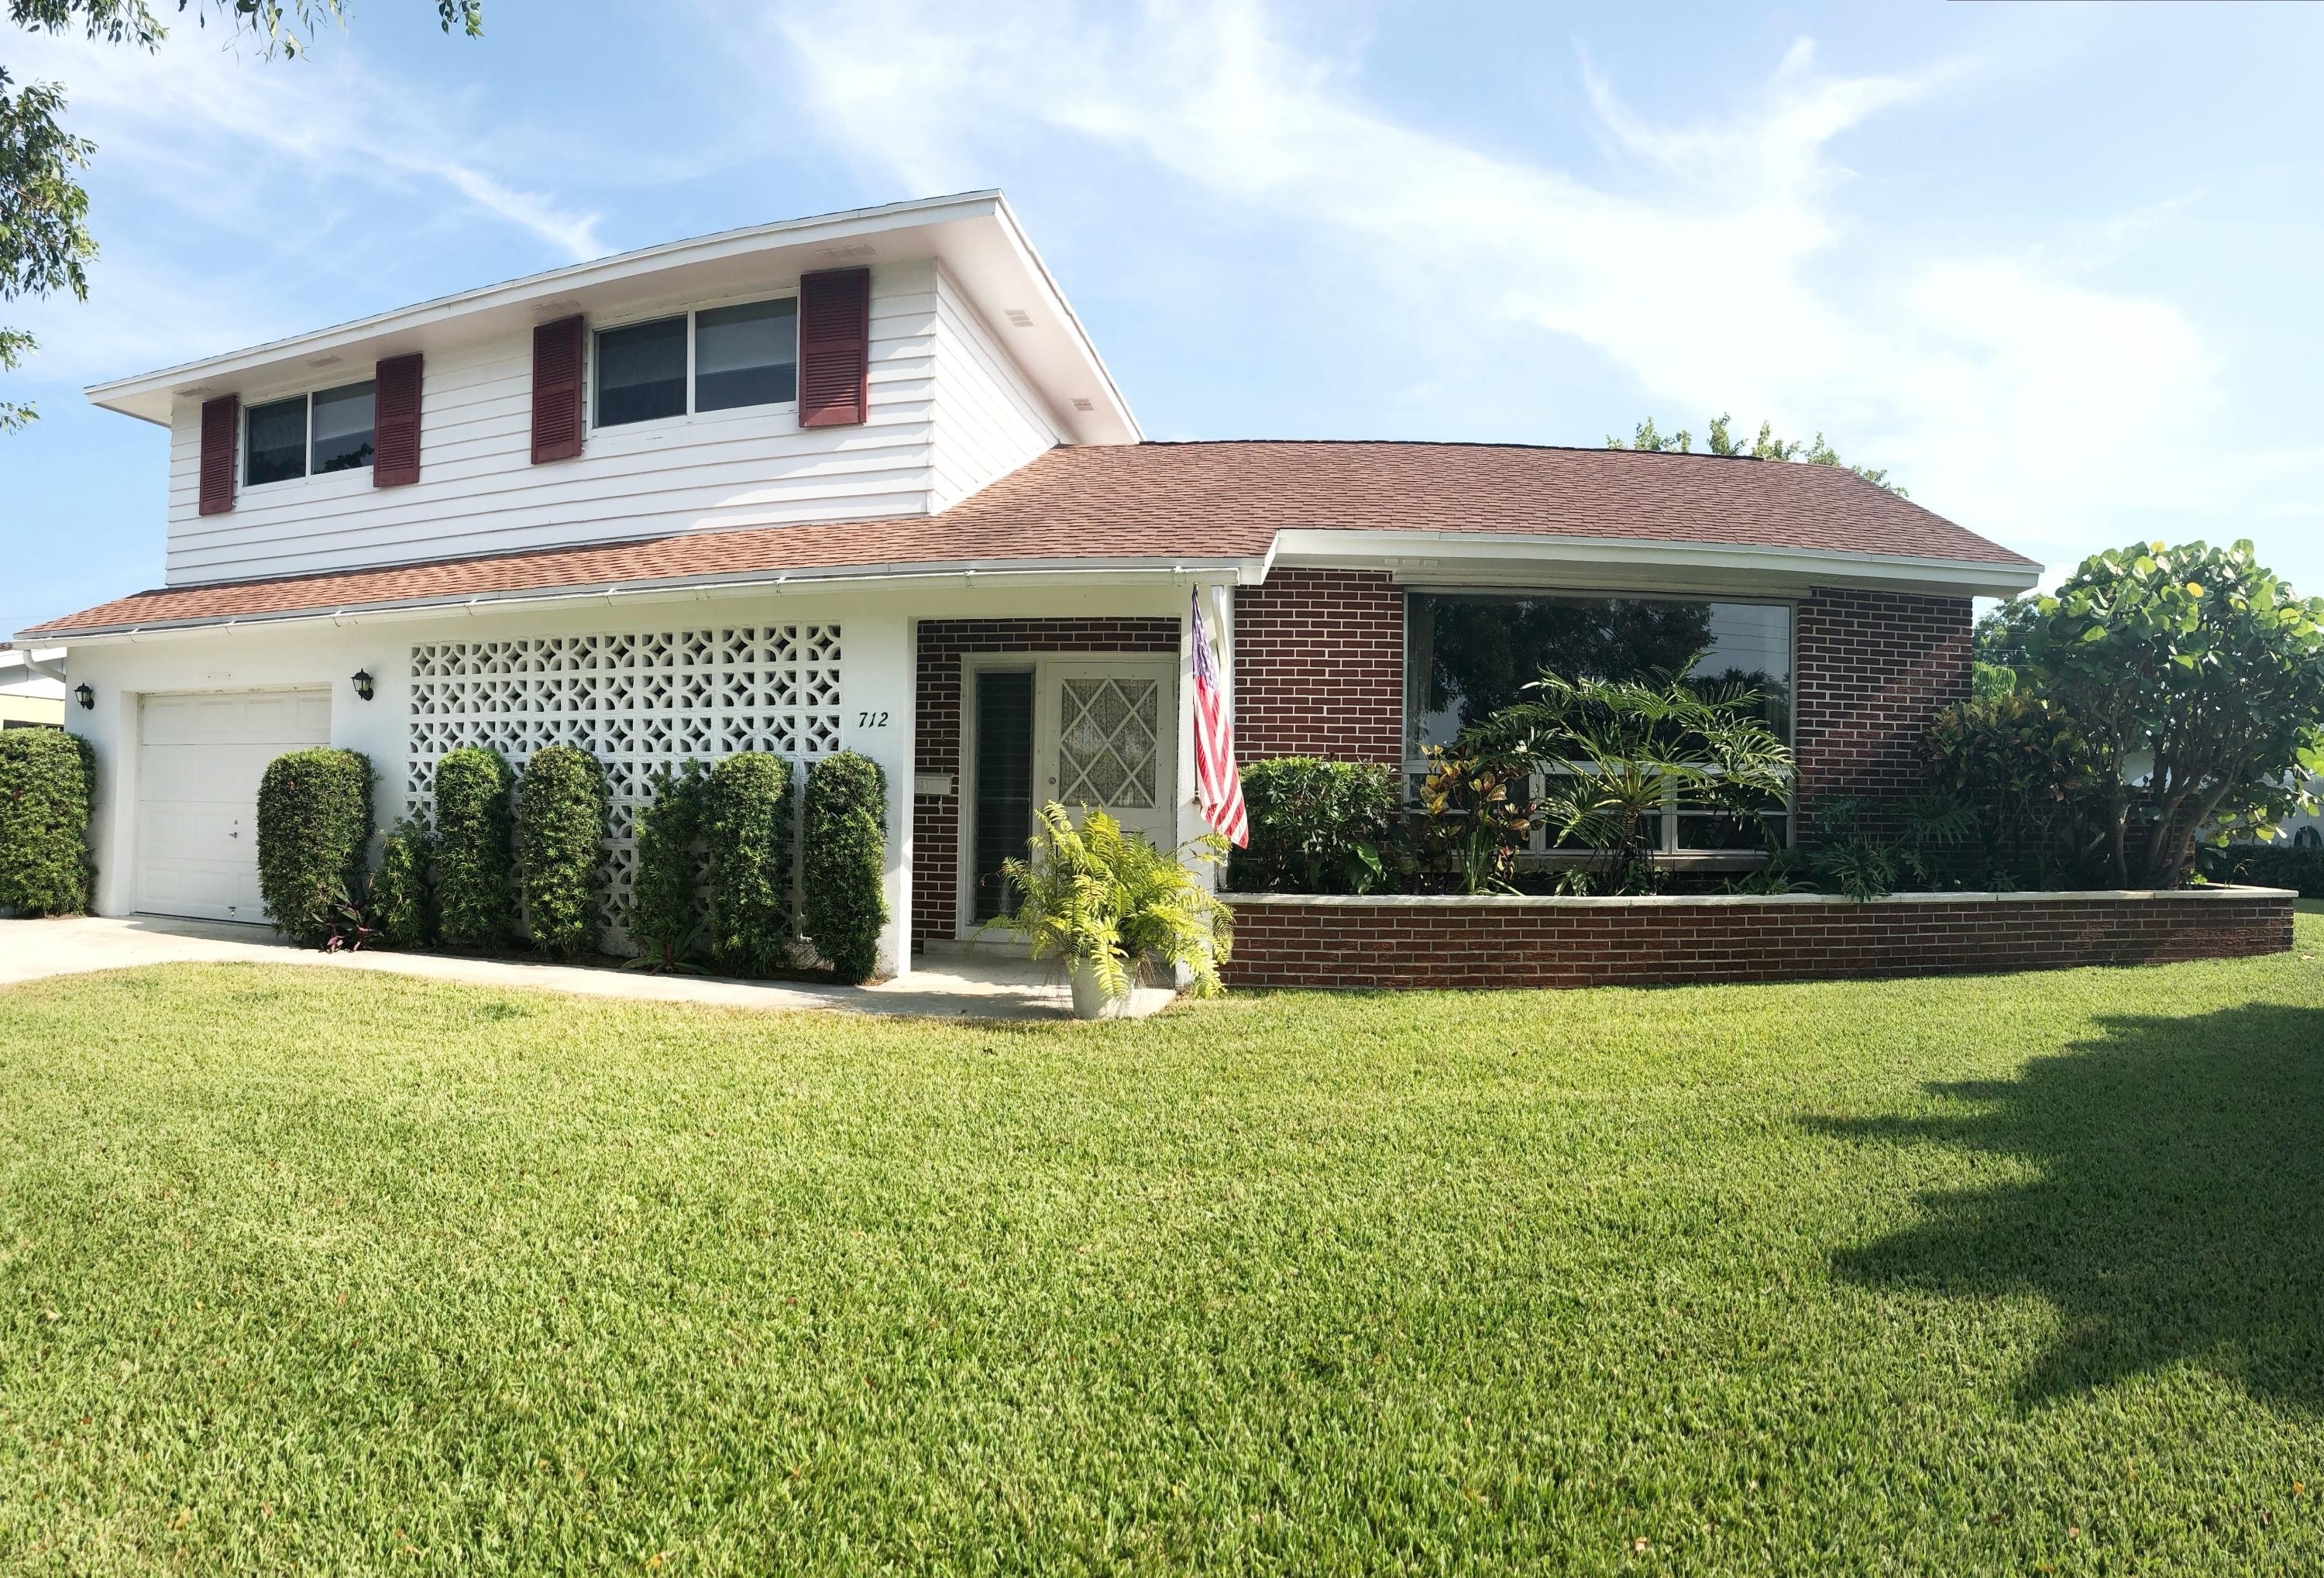 Single Family Home at North Palm Beach